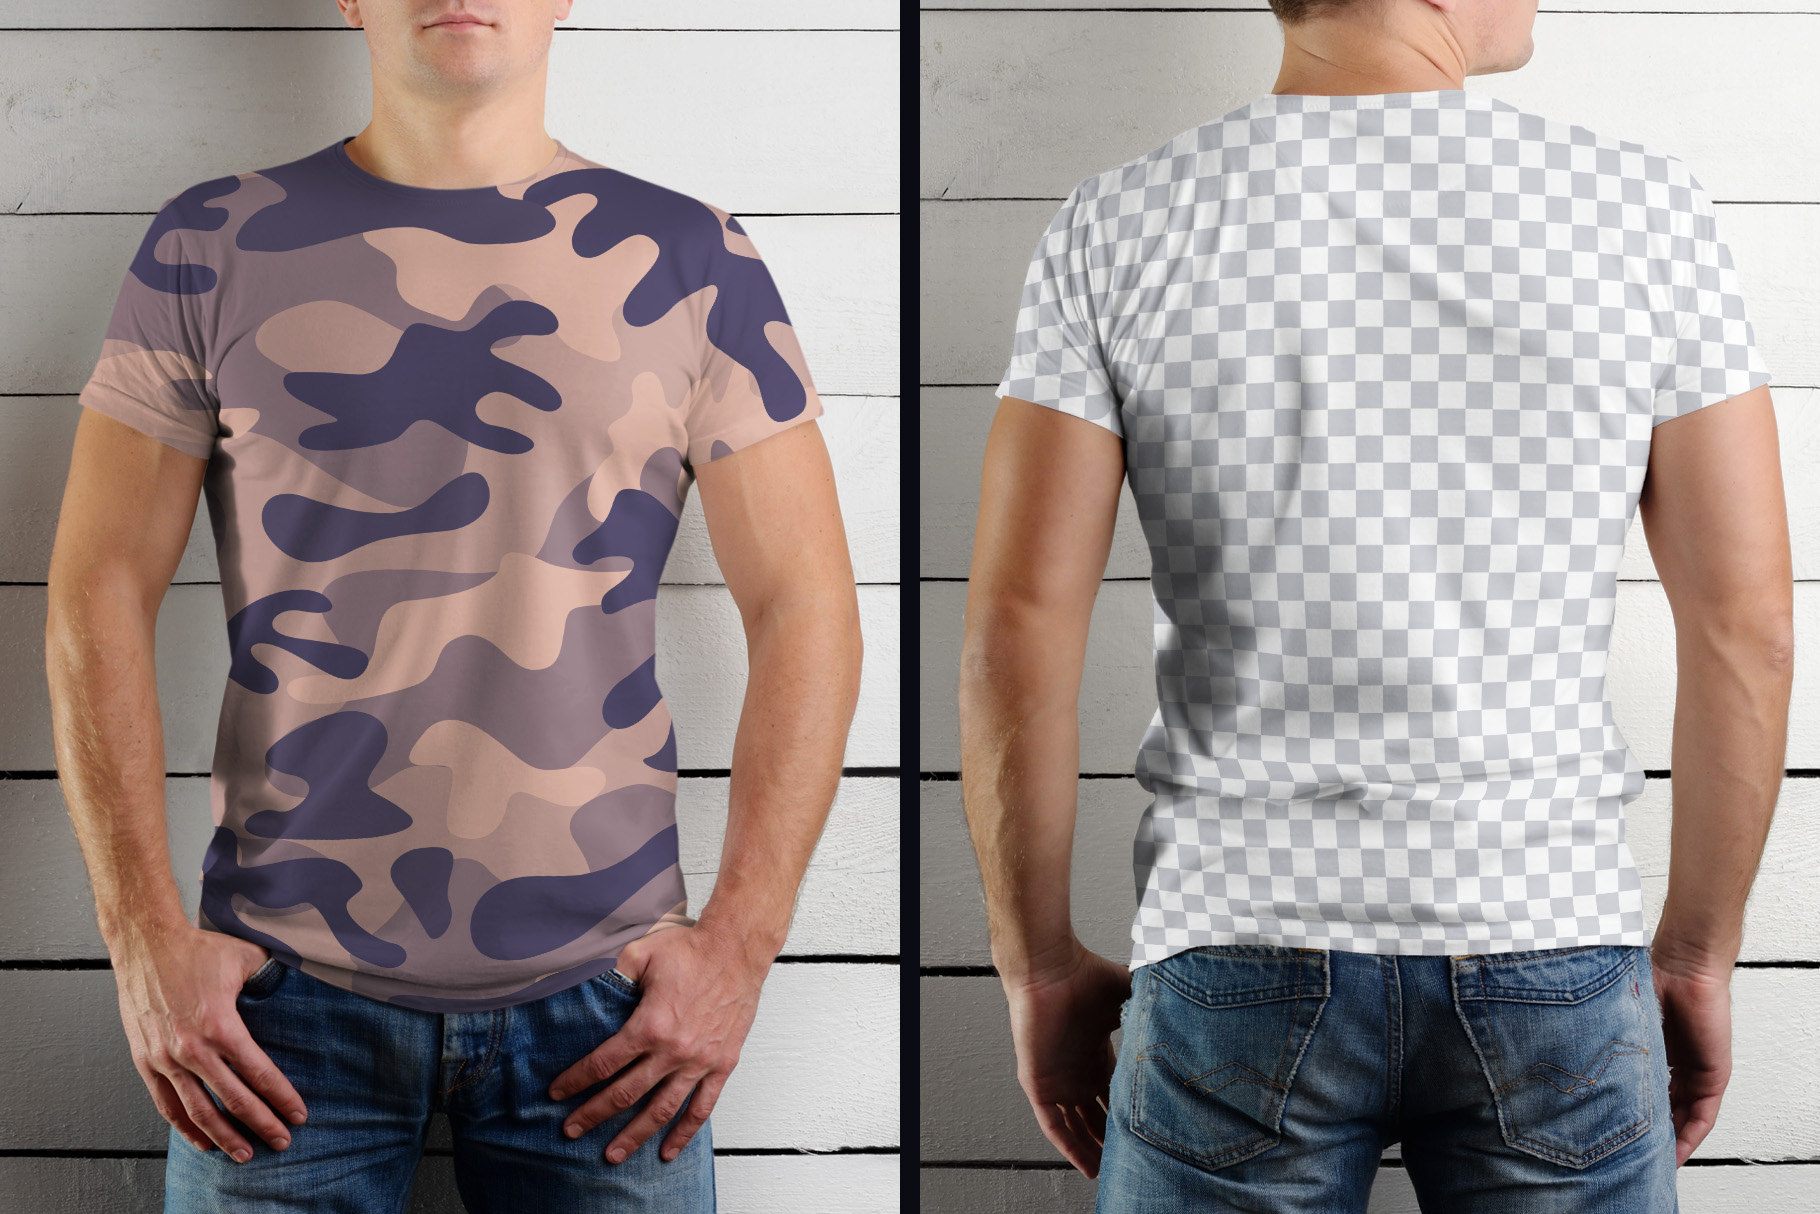 9 Mockup Man T-shirts on Wooden Background front and back t-shirts mockup.